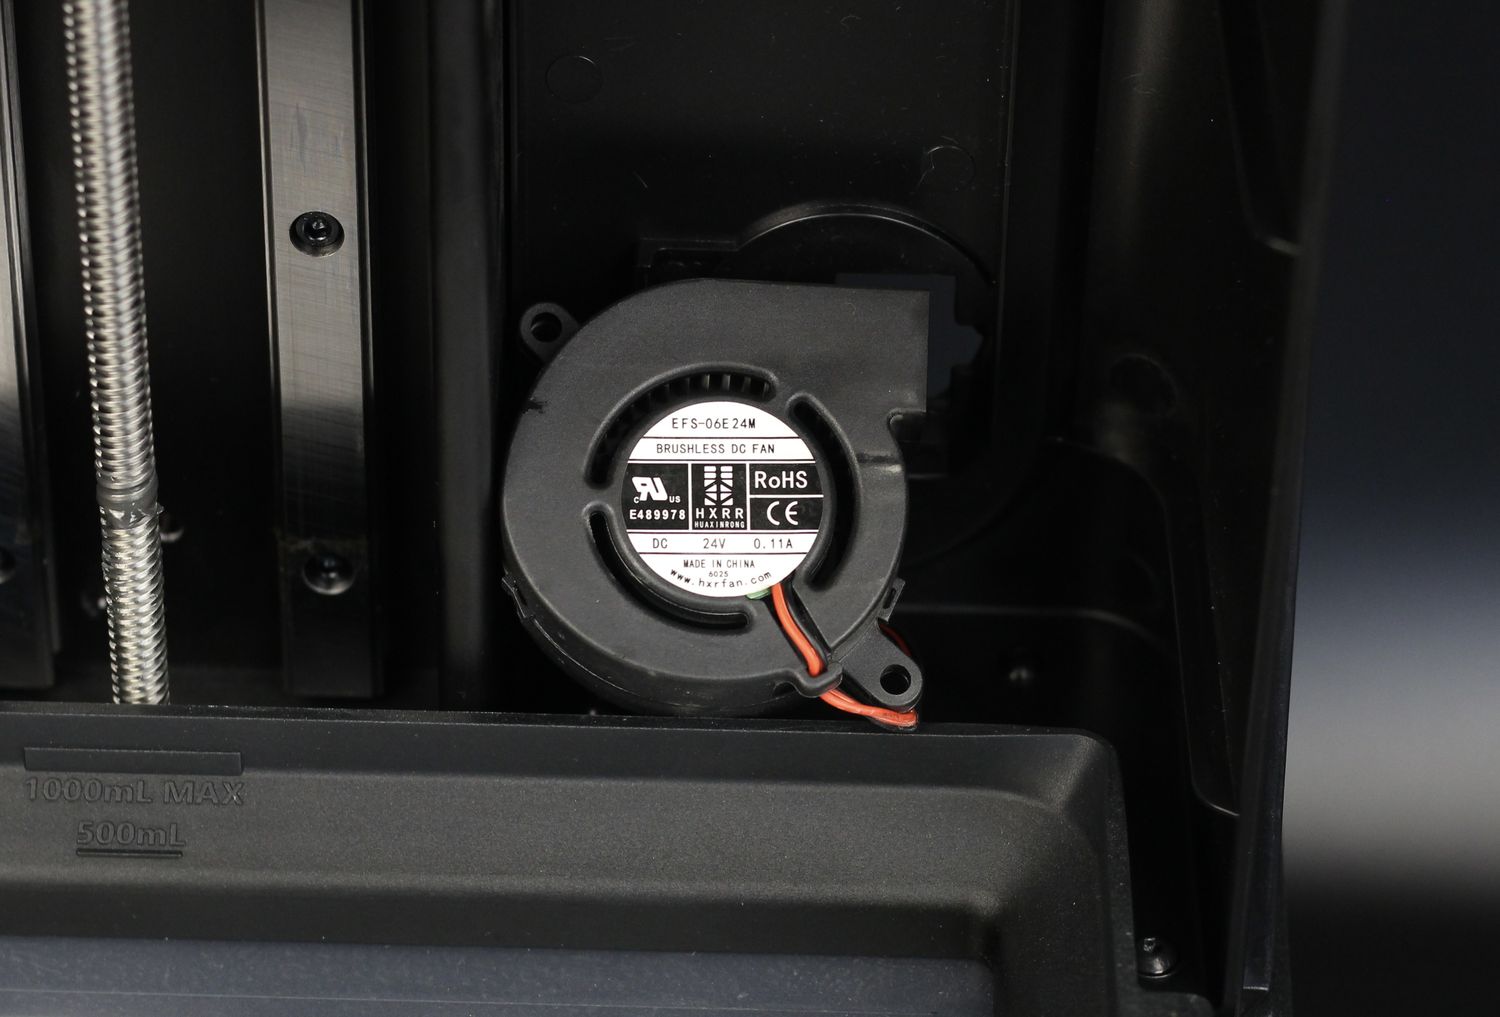 Halot Mage Pro carbon filter fan | Creality Halot Mage Pro Review: Great Prints, Bad Software